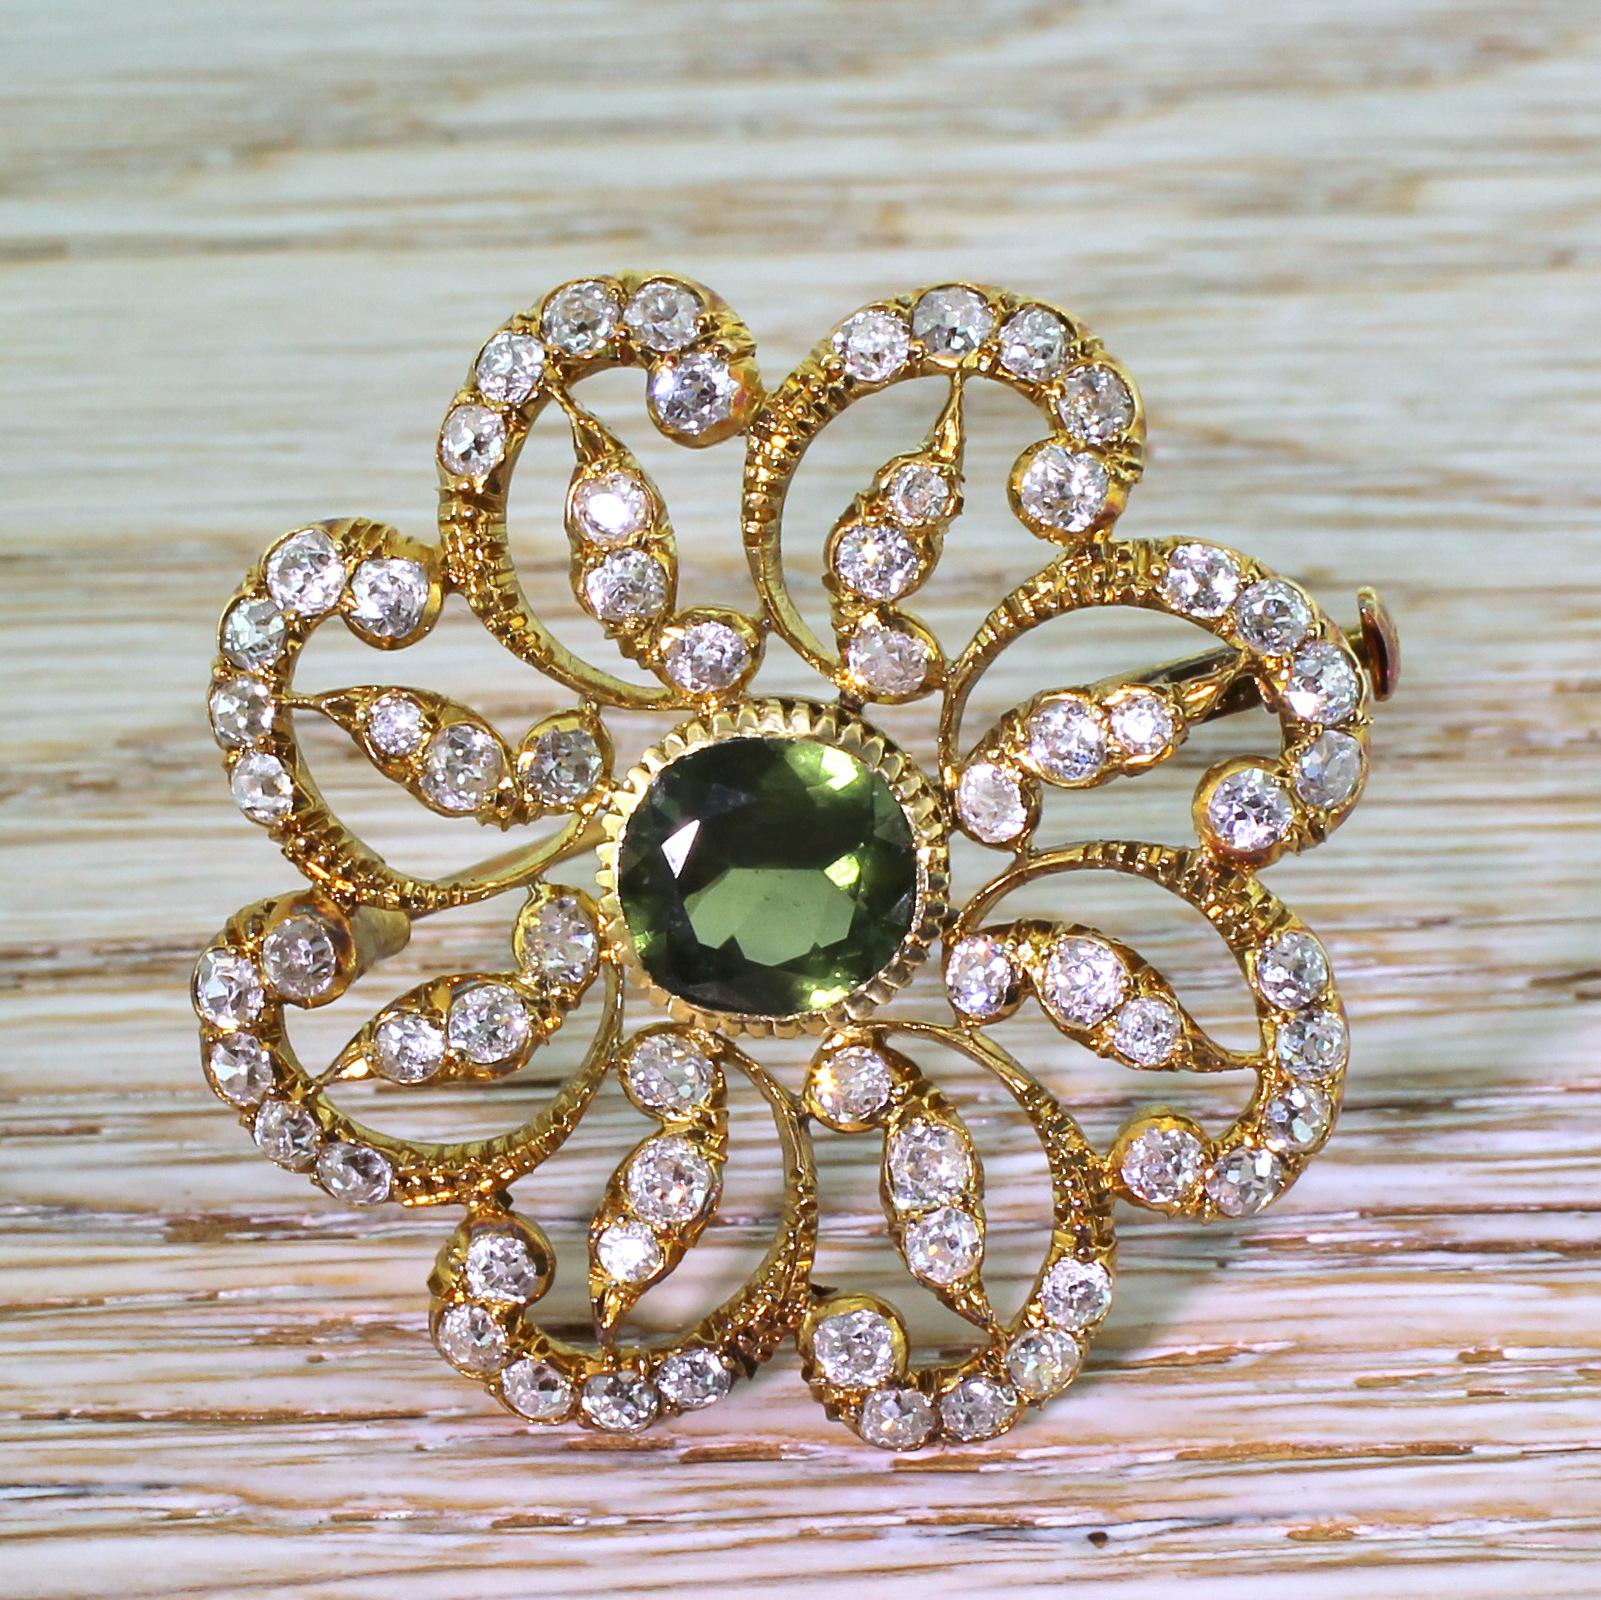 Victorian 3.00 Carat Green Sapphire and 3.50 Carat Old Cut Diamond Brooch For Sale 4